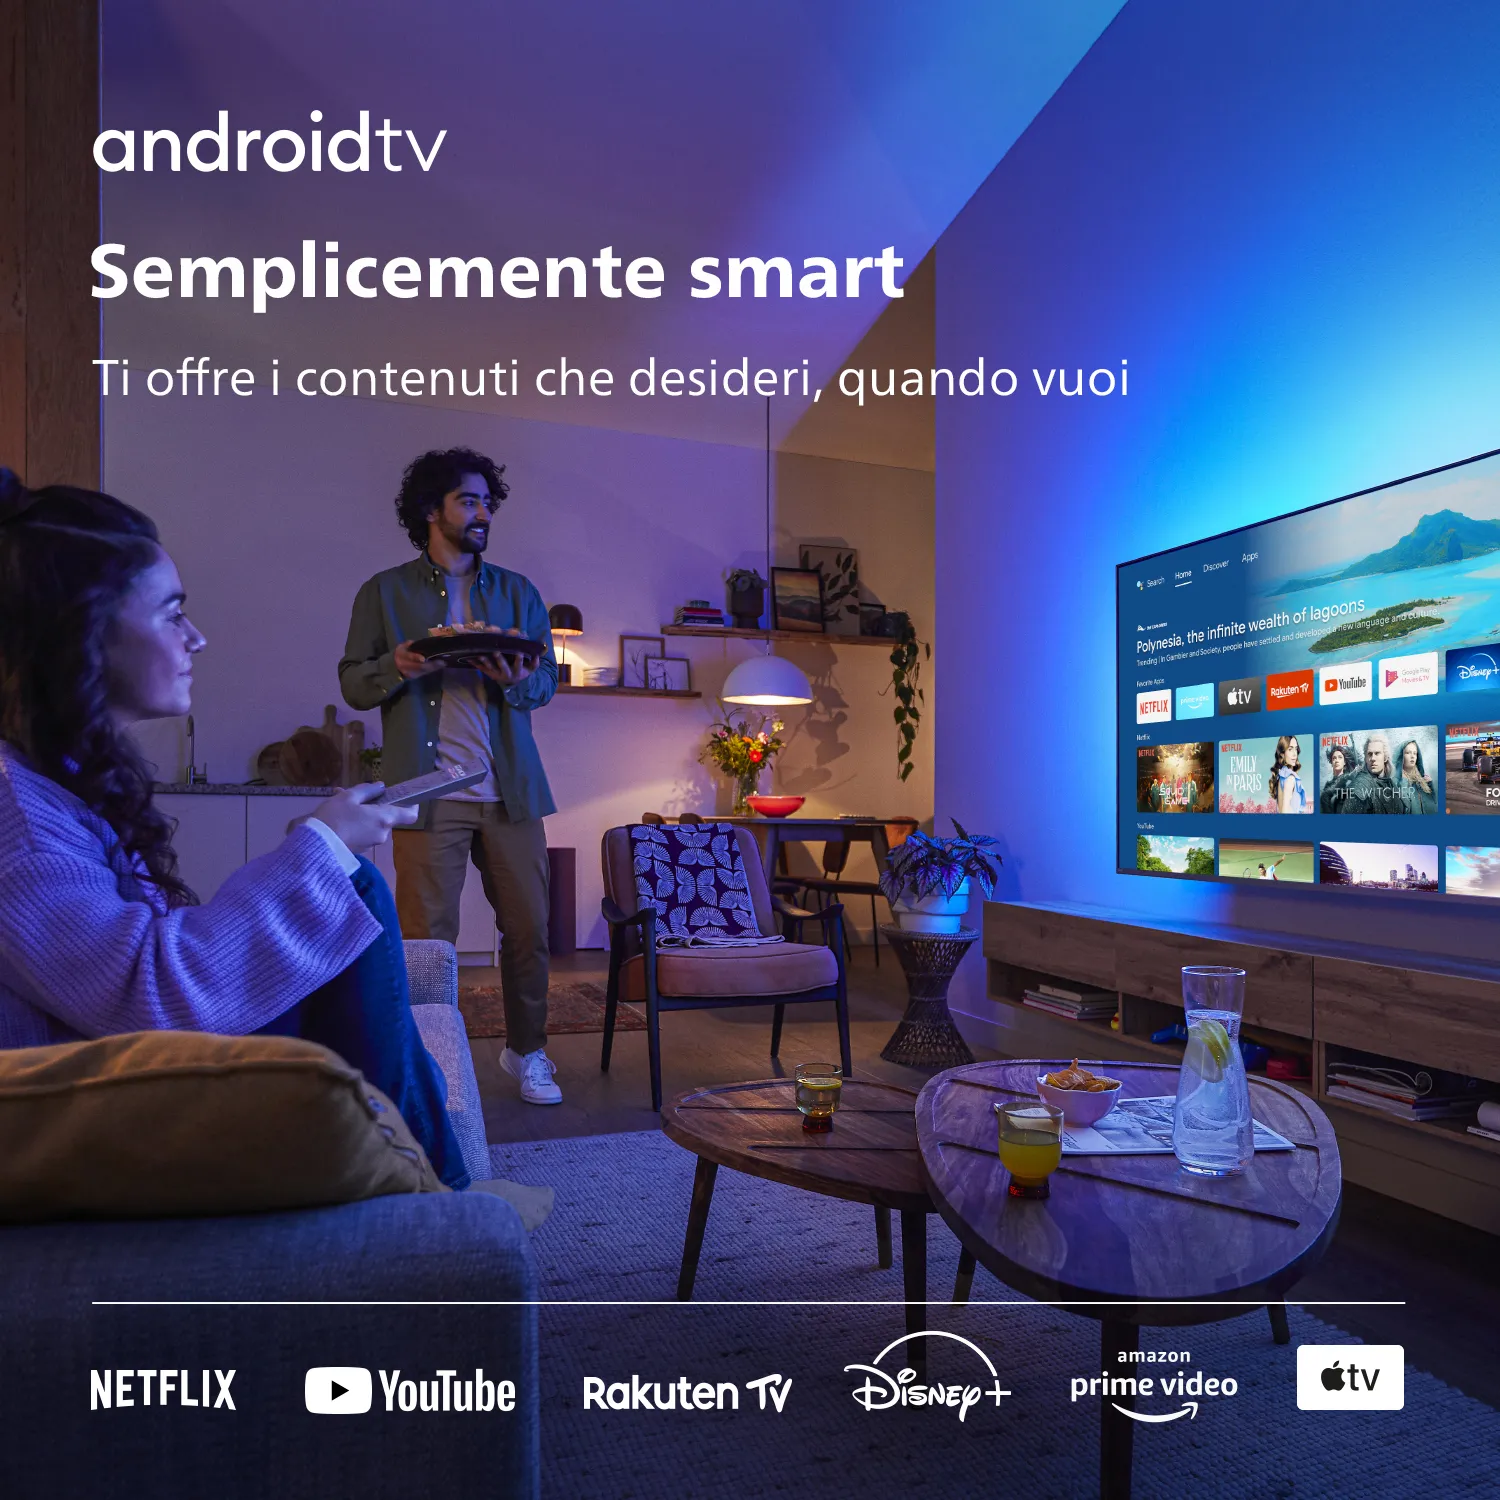 Philips The One Smart Tv 50 Pollici 4k Ultra Hd Display Led Con Ambilight E Sistema Android Tv 2672